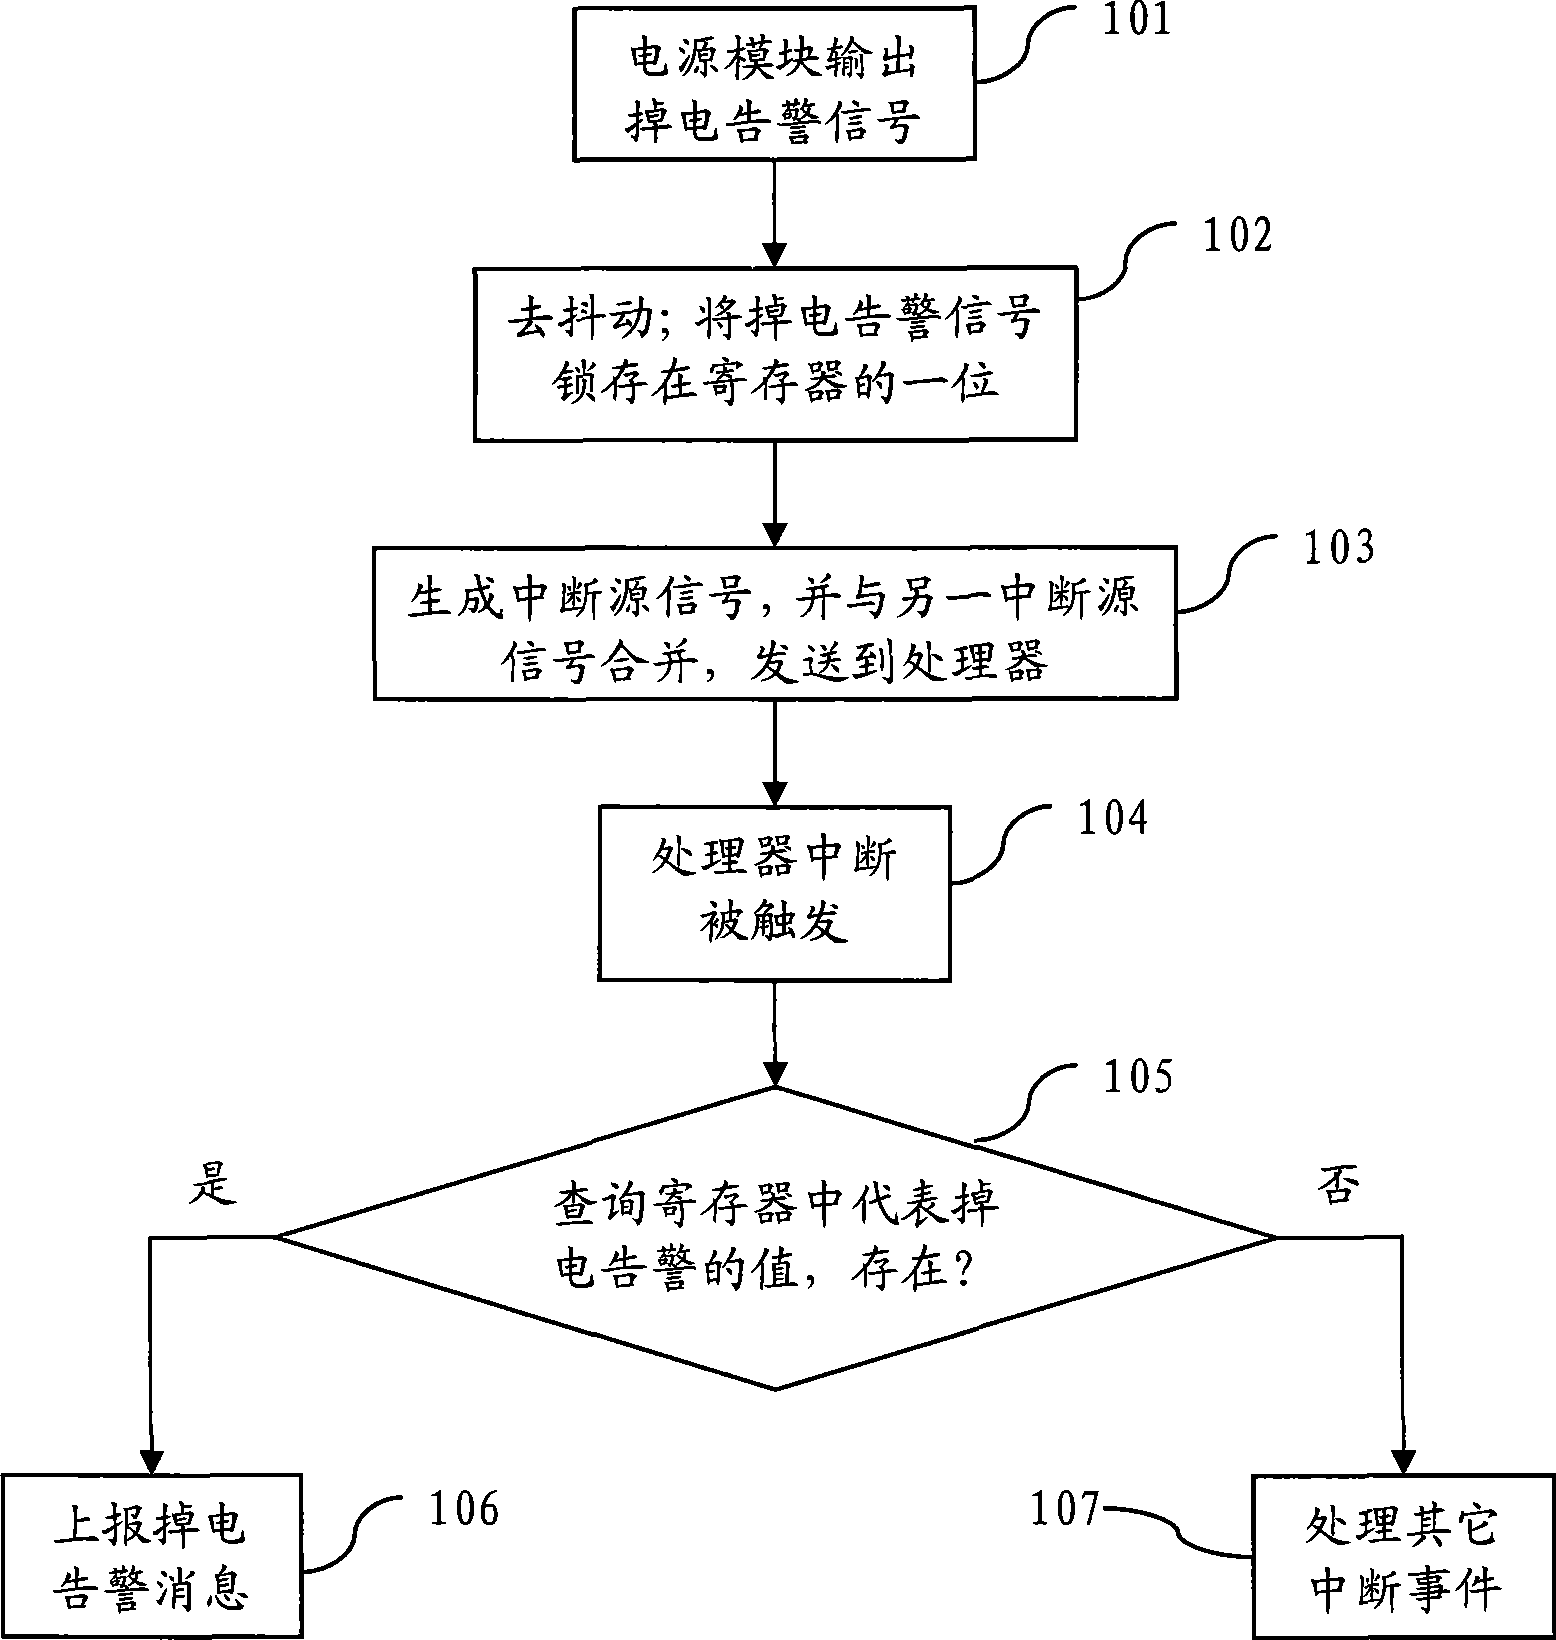 Method and apparatus for implementing base station power-down alarm by using interrupt